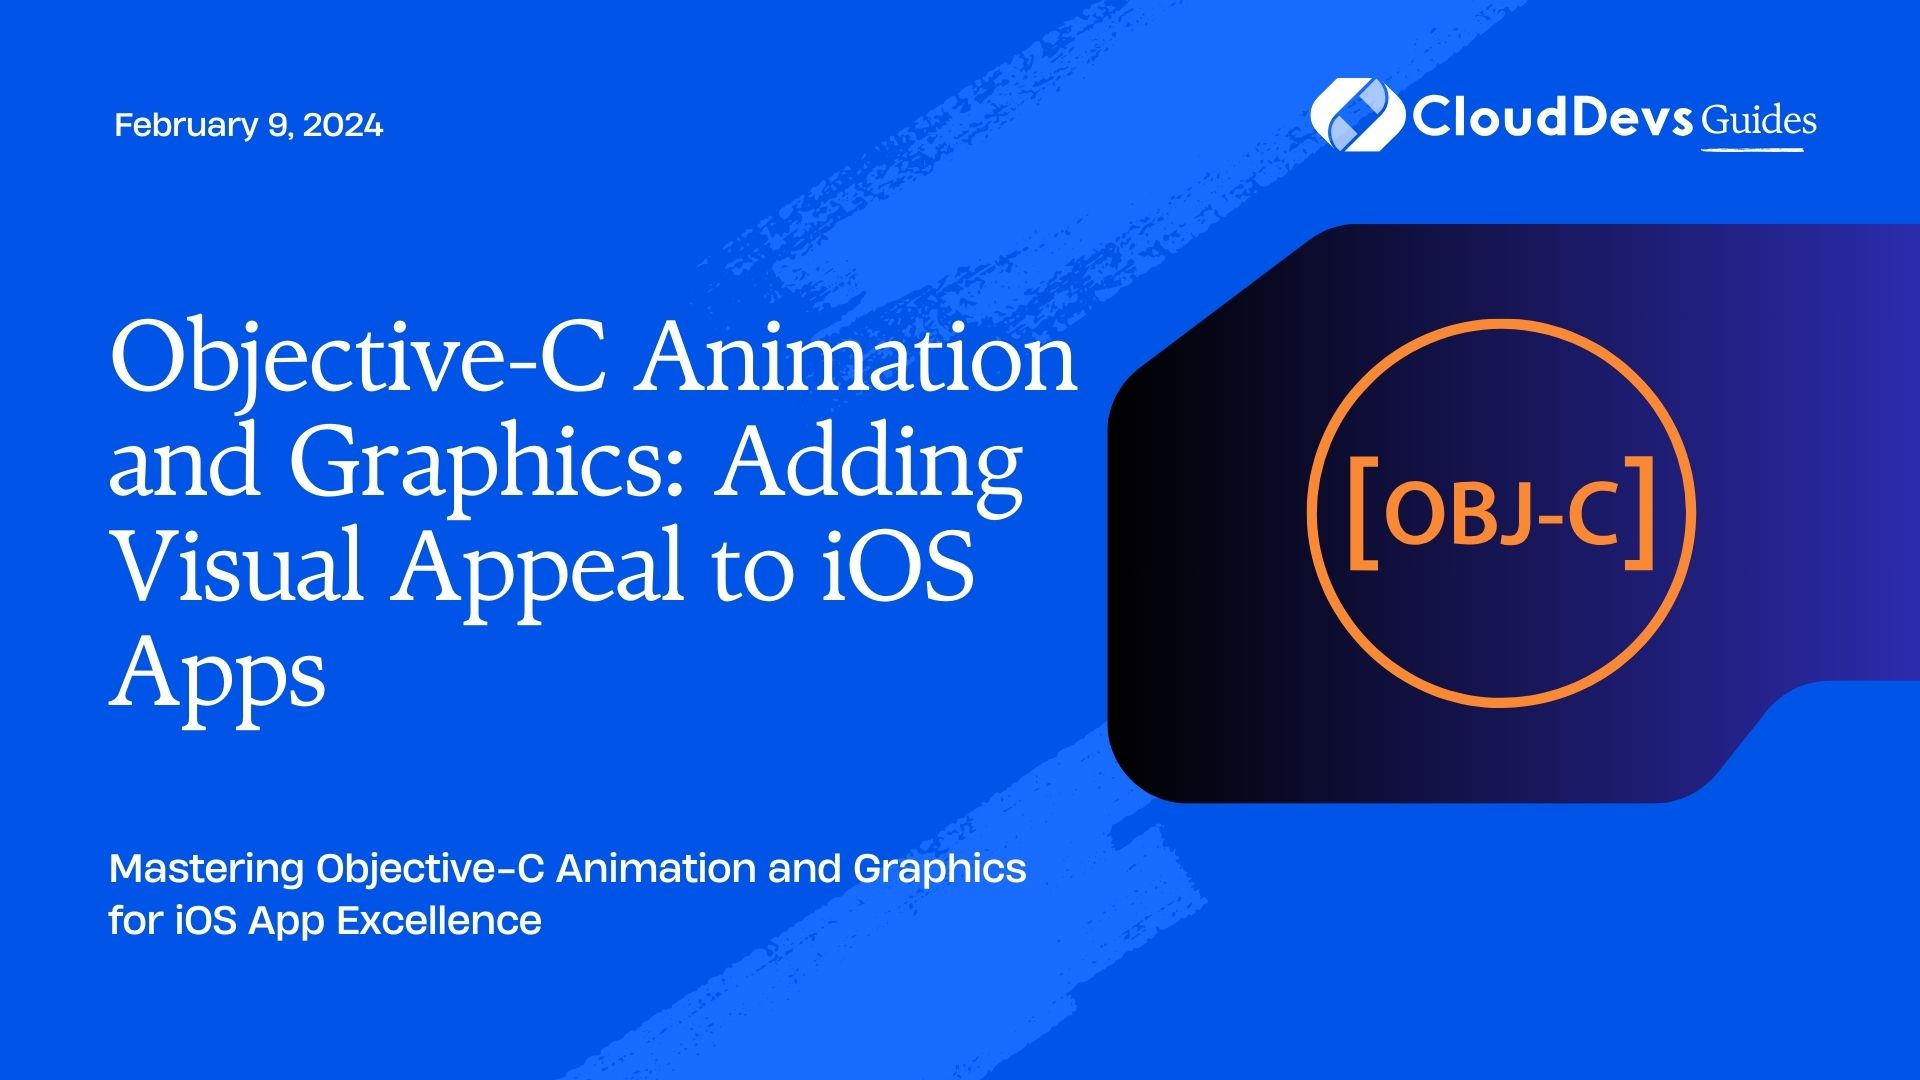 Objective-C Animation and Graphics: Adding Visual Appeal to iOS Apps